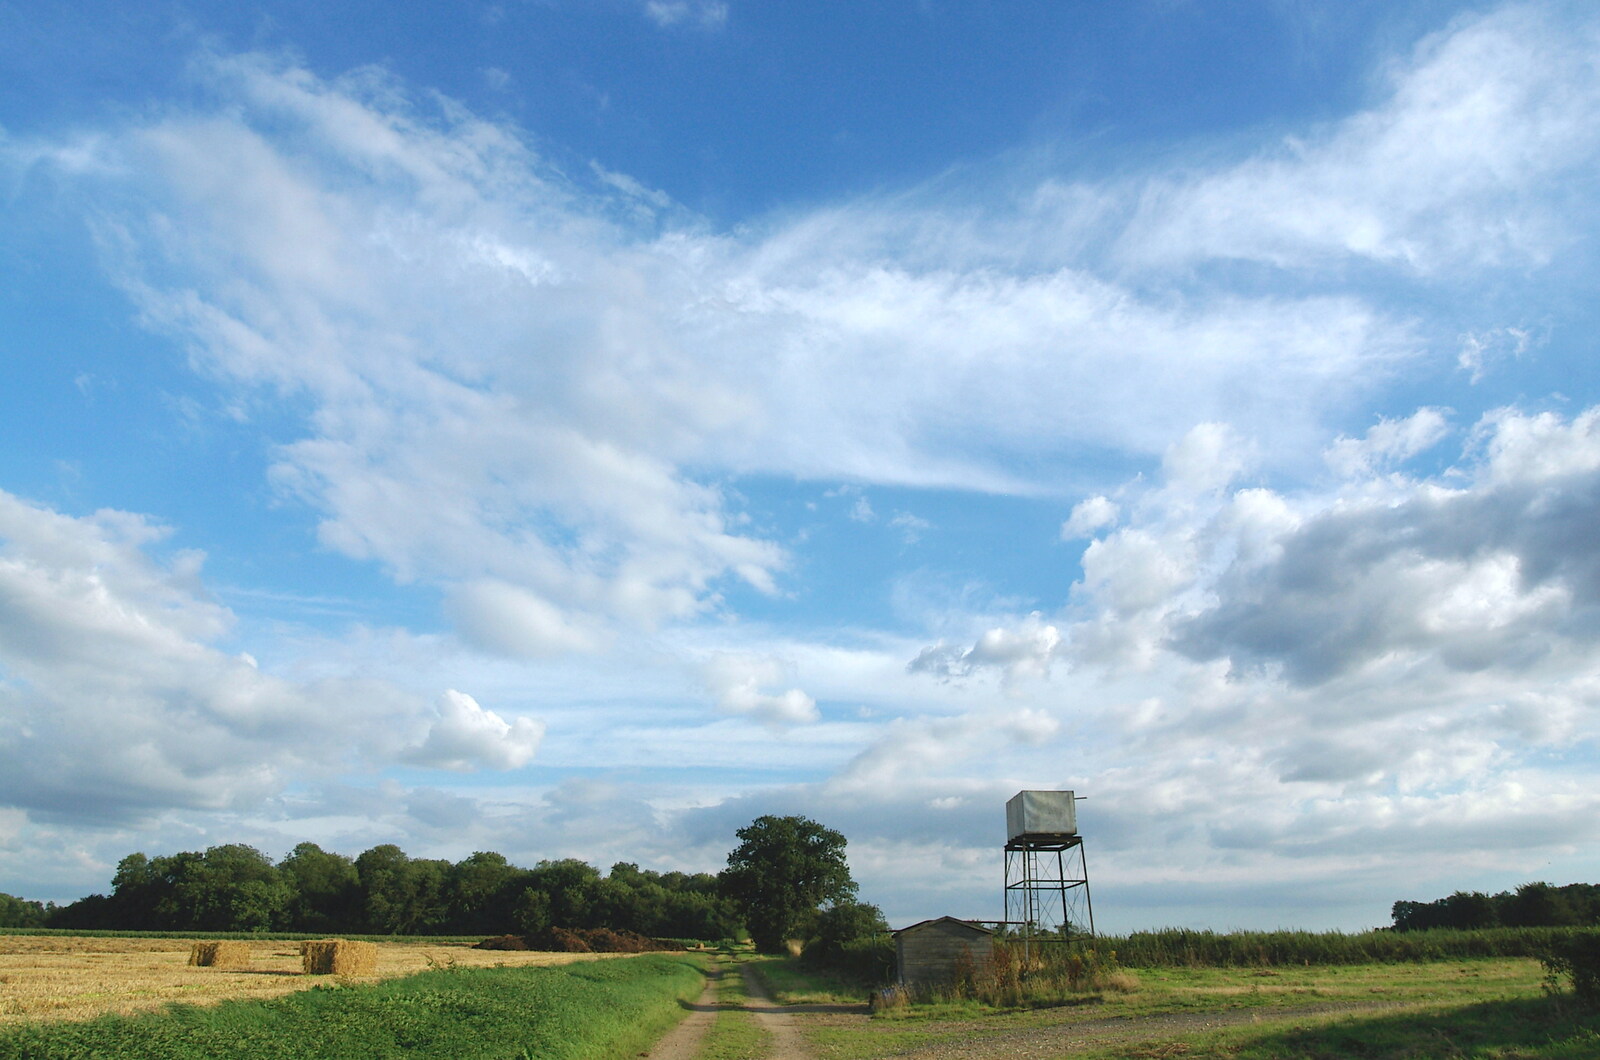 The water tower near Hunston from The BBS, and the Big Skies of East Anglia, Diss and Hunston, Norfolk and Suffolk - 6th August 2005